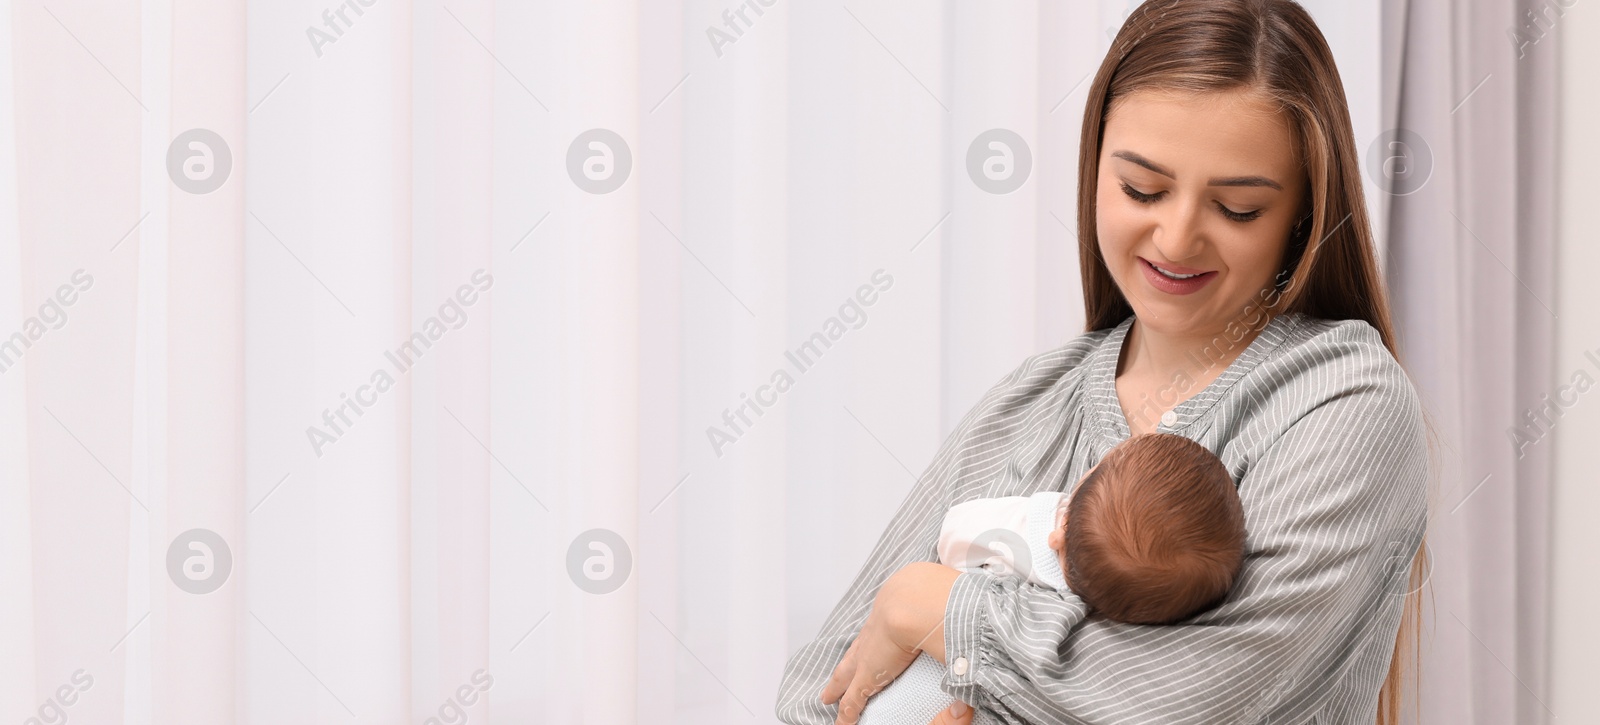 Image of Mother holding her small baby indoors. Banner design with space for text